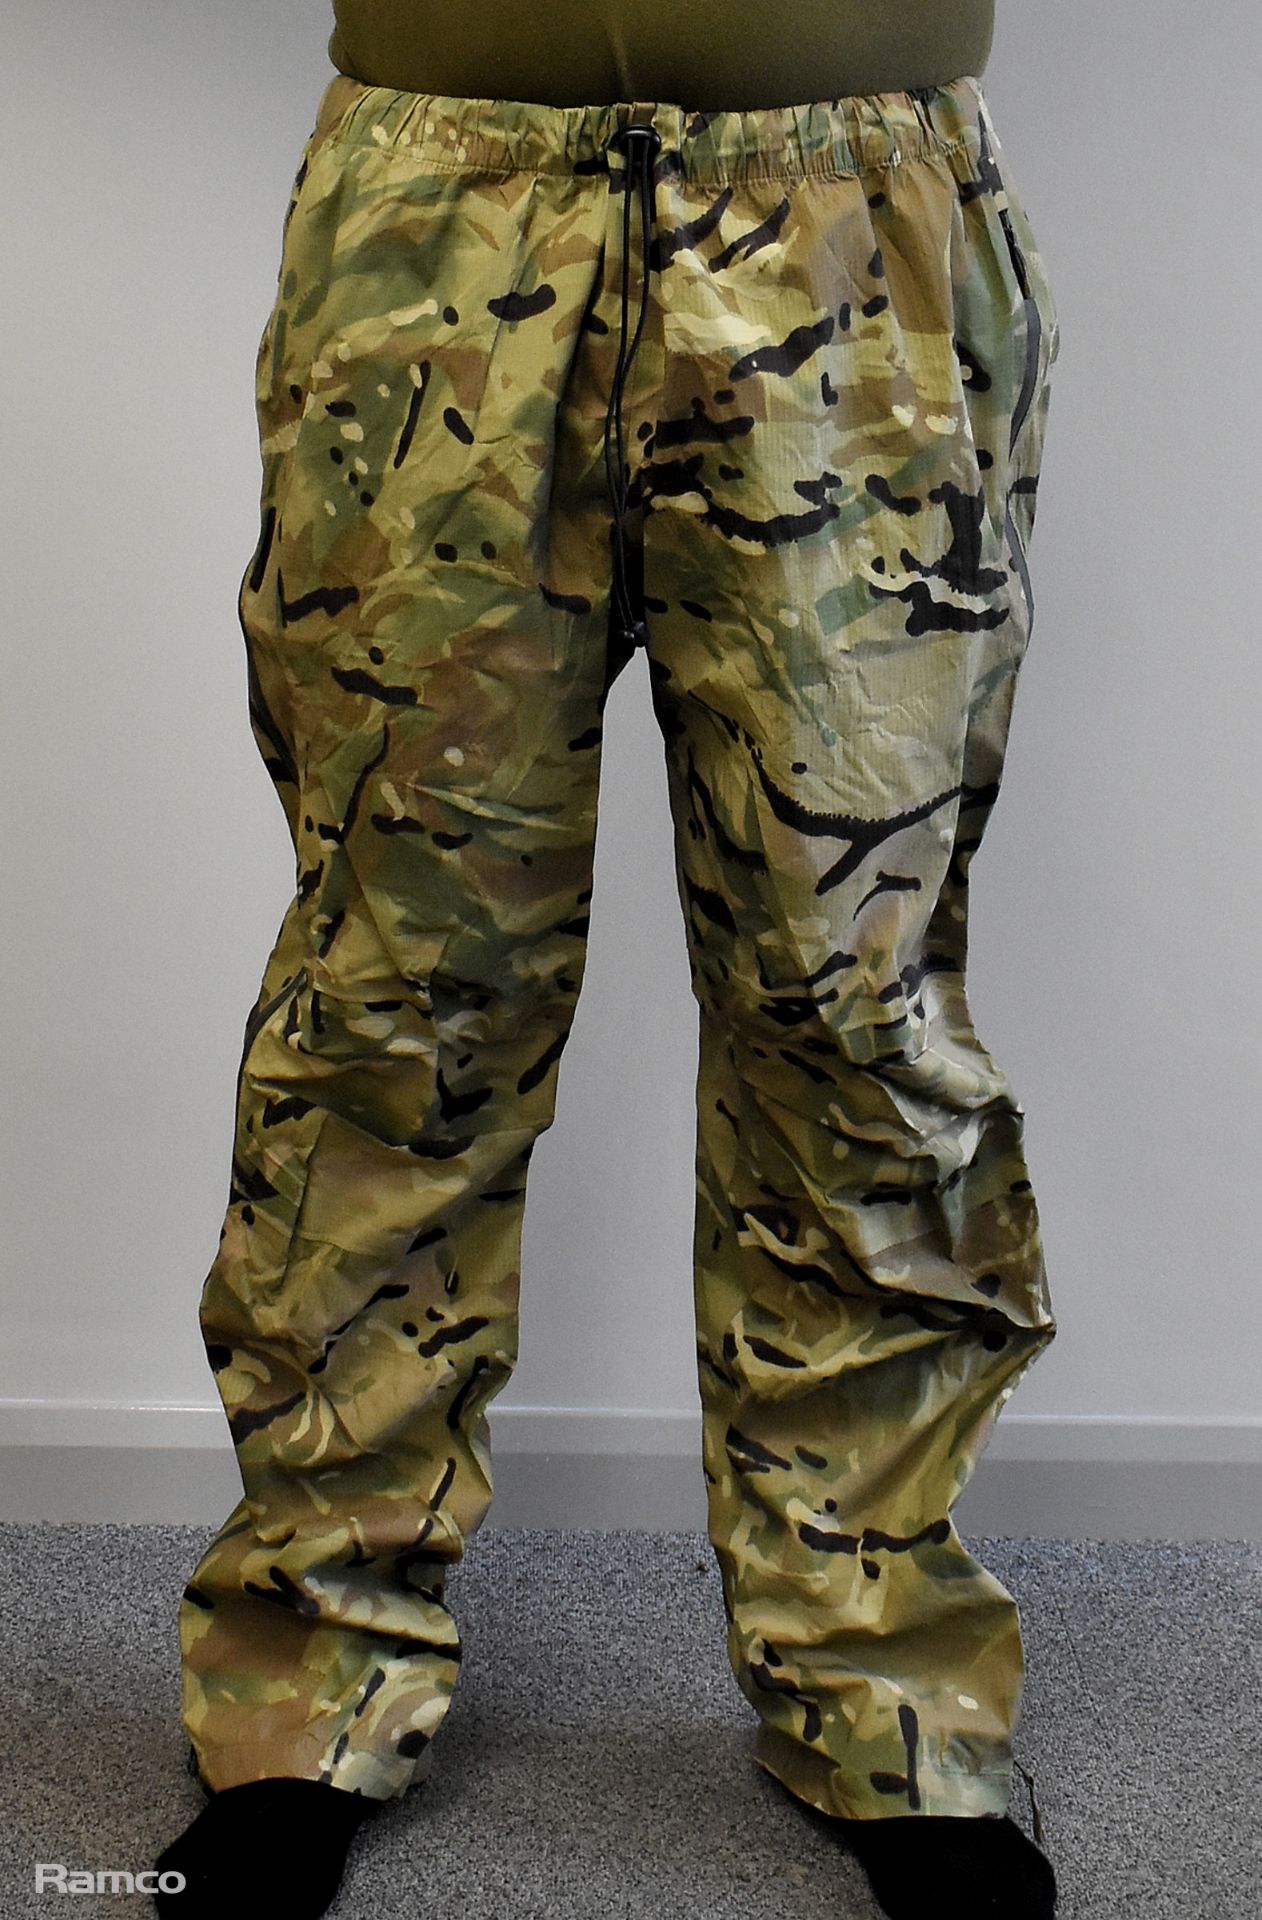 50x British Army MTP waterproof lightweight trousers - mixed grades and sizes